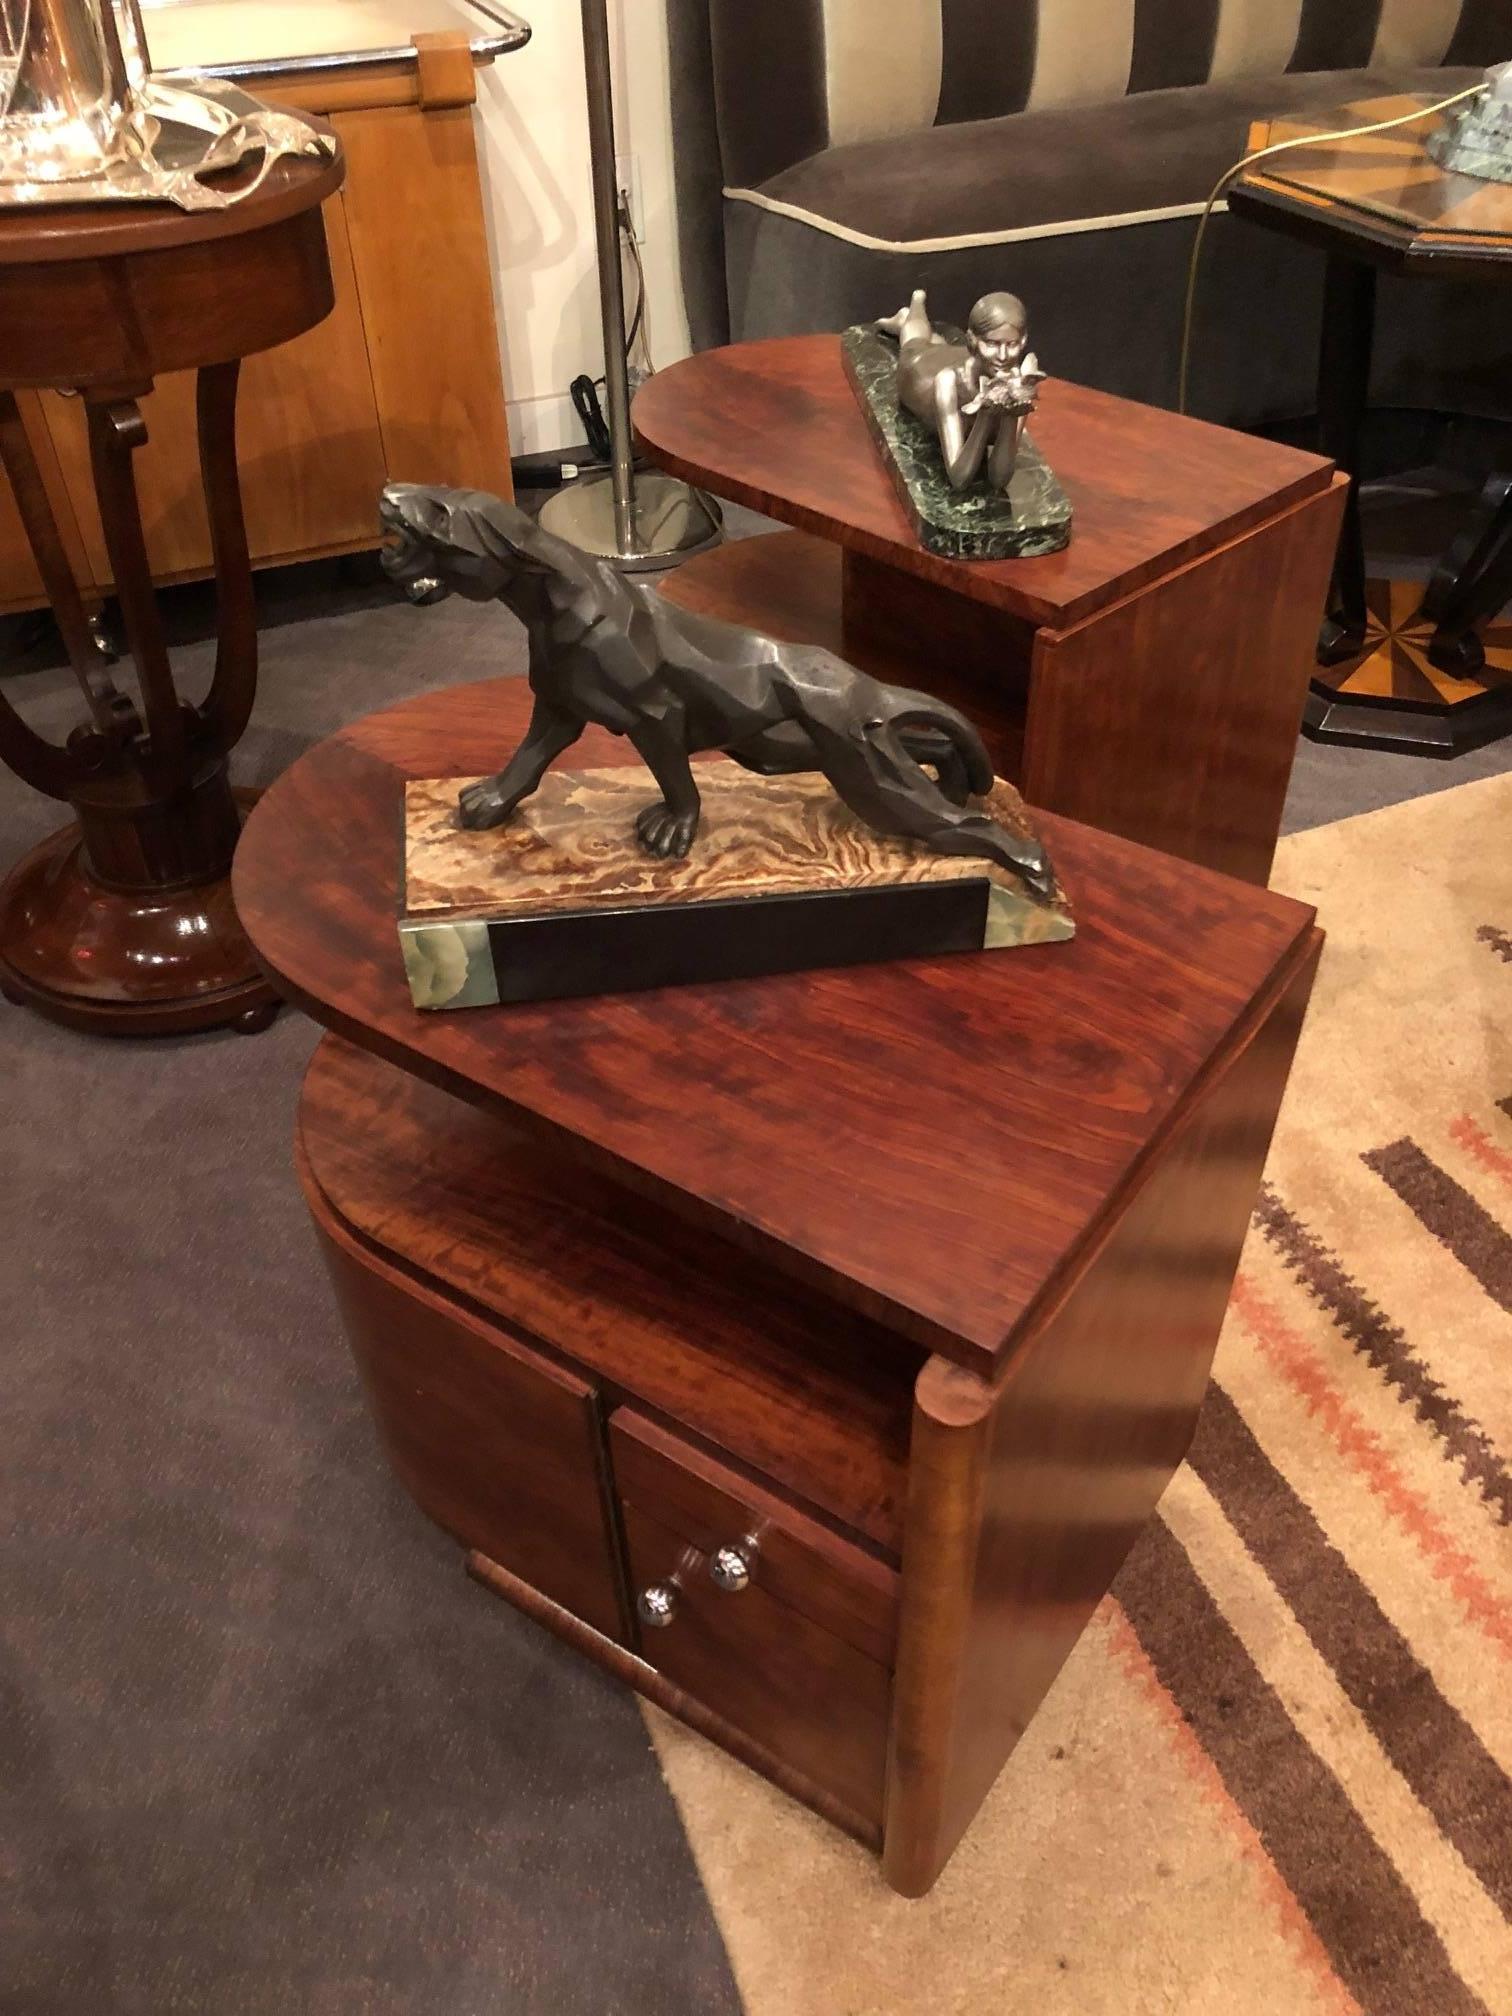 A pair of streamline deco nightstands or side tables, which are crafted in beautifully grained rosewood. These are in great condition, ready to flank a bed, couch or a set of shelves. An example of the “later deco” styling with its elegant curved